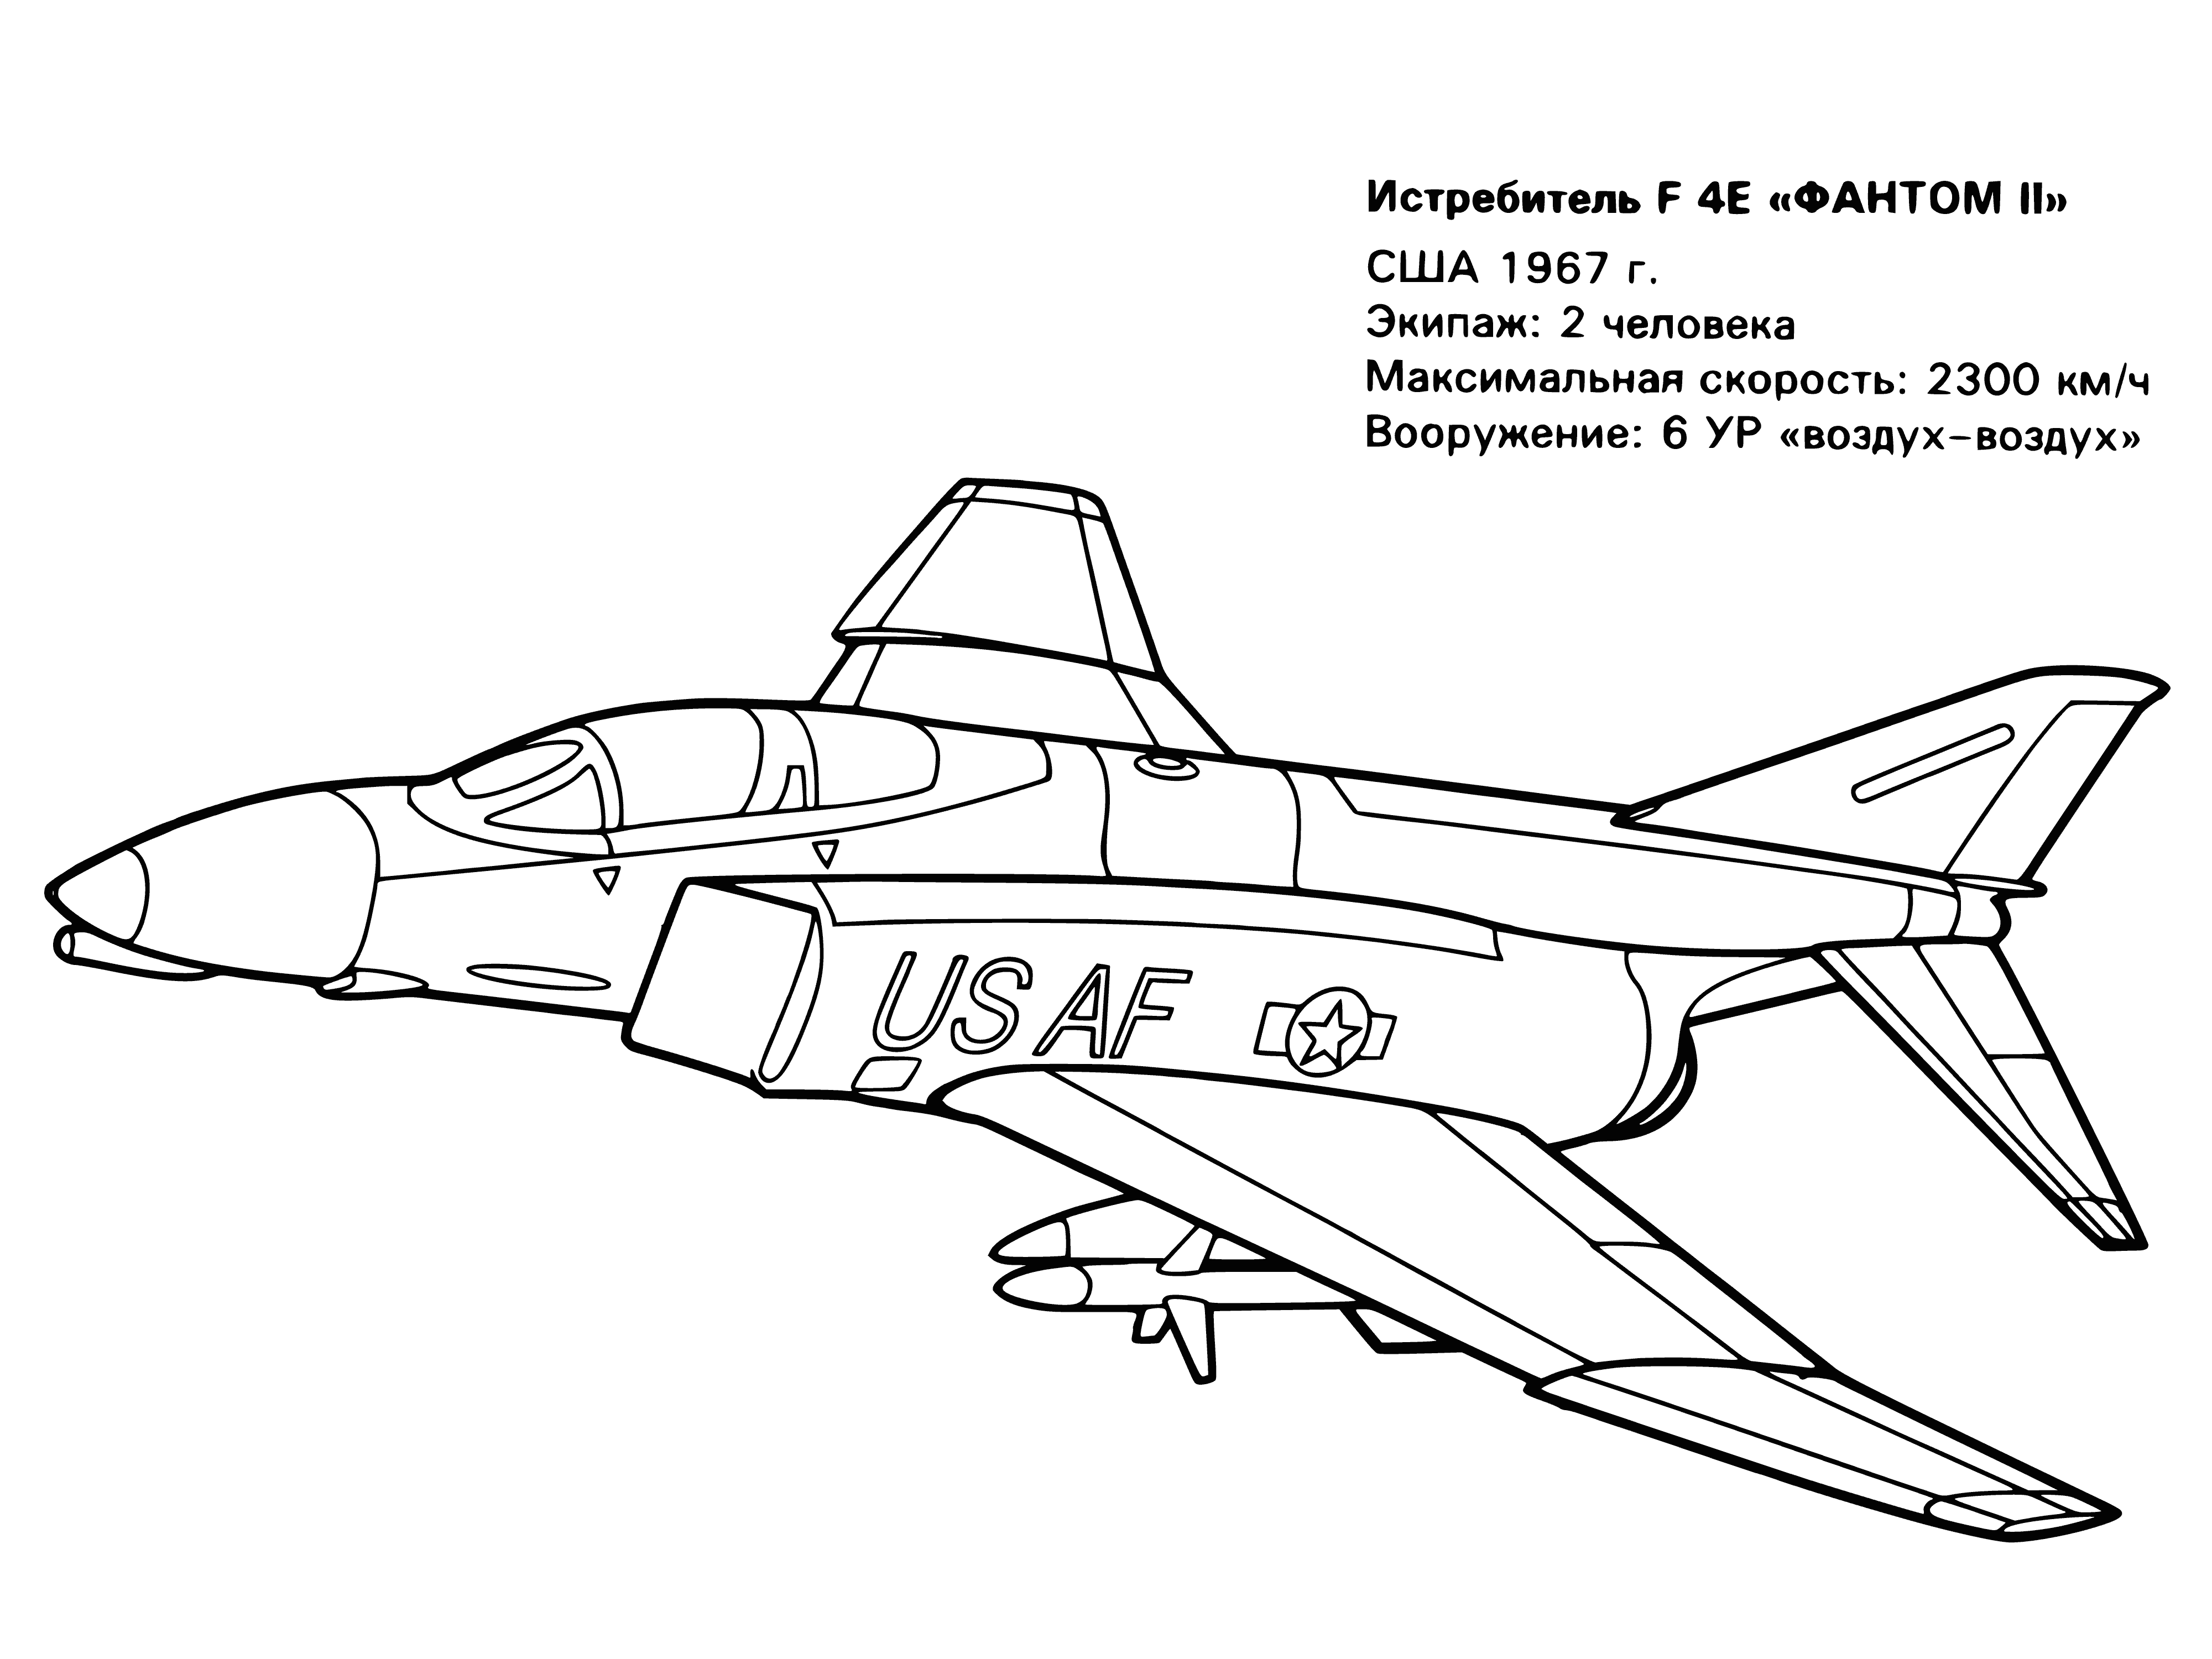 coloring page: Coloring page of classic USA fighter plane, helicopter & big white rocket. Plane has pointed nose, swept back wings & camo pattern. Helicopter has rotor & round engines. Rocket white with red & blue stripes. #aviation